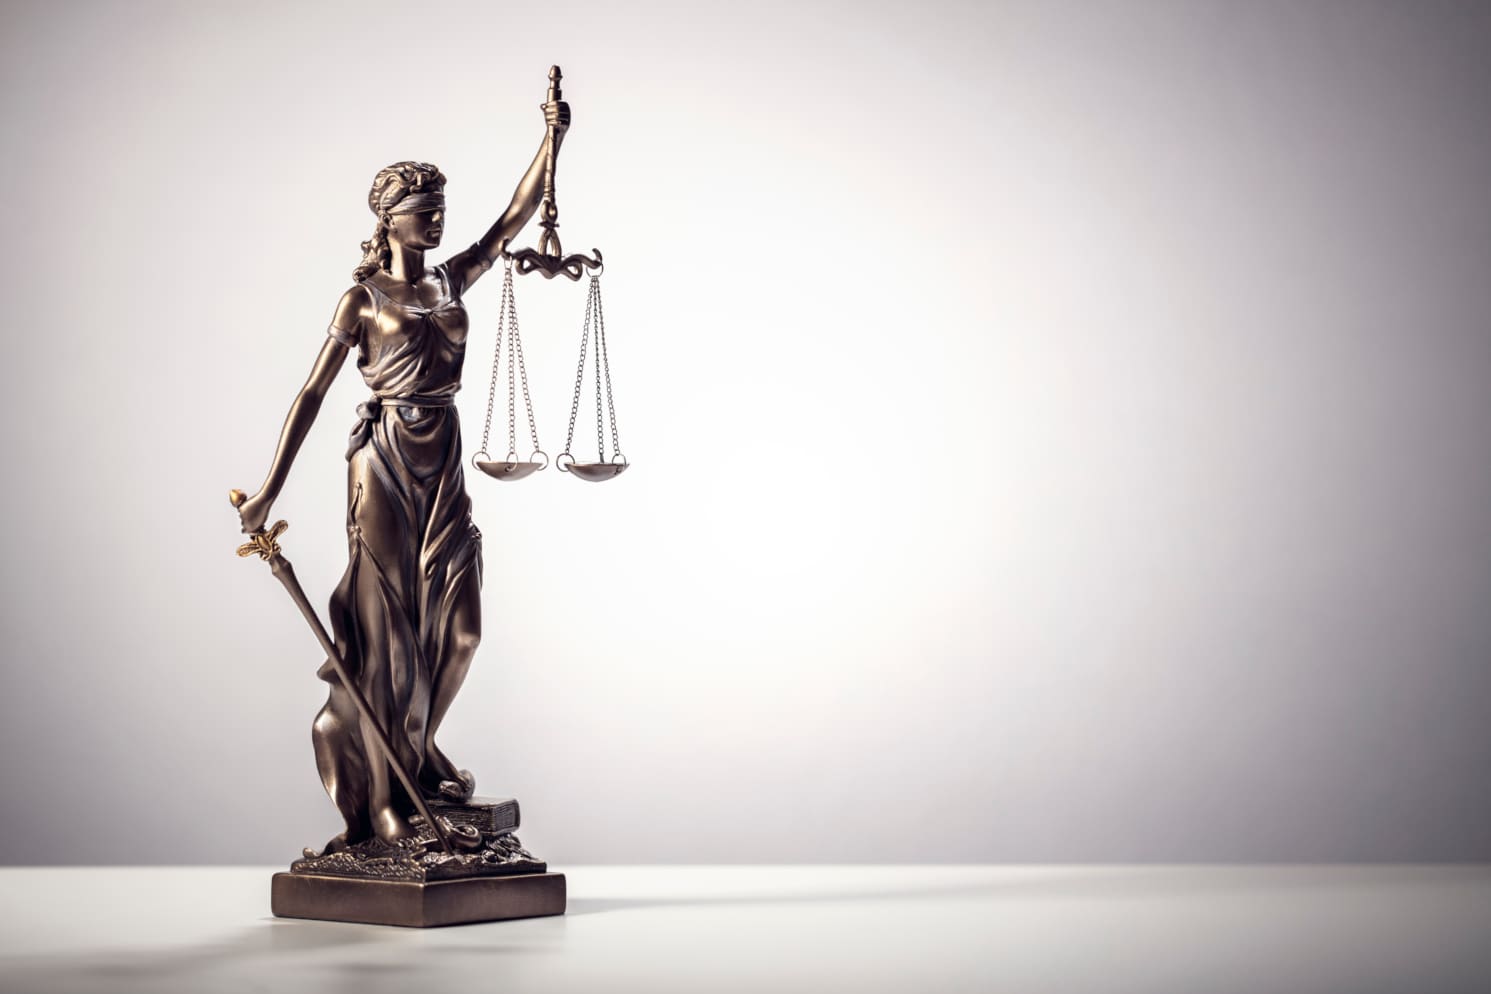 Statuette of Lady Justice, the allegorical personification of the moral force in judicial systems